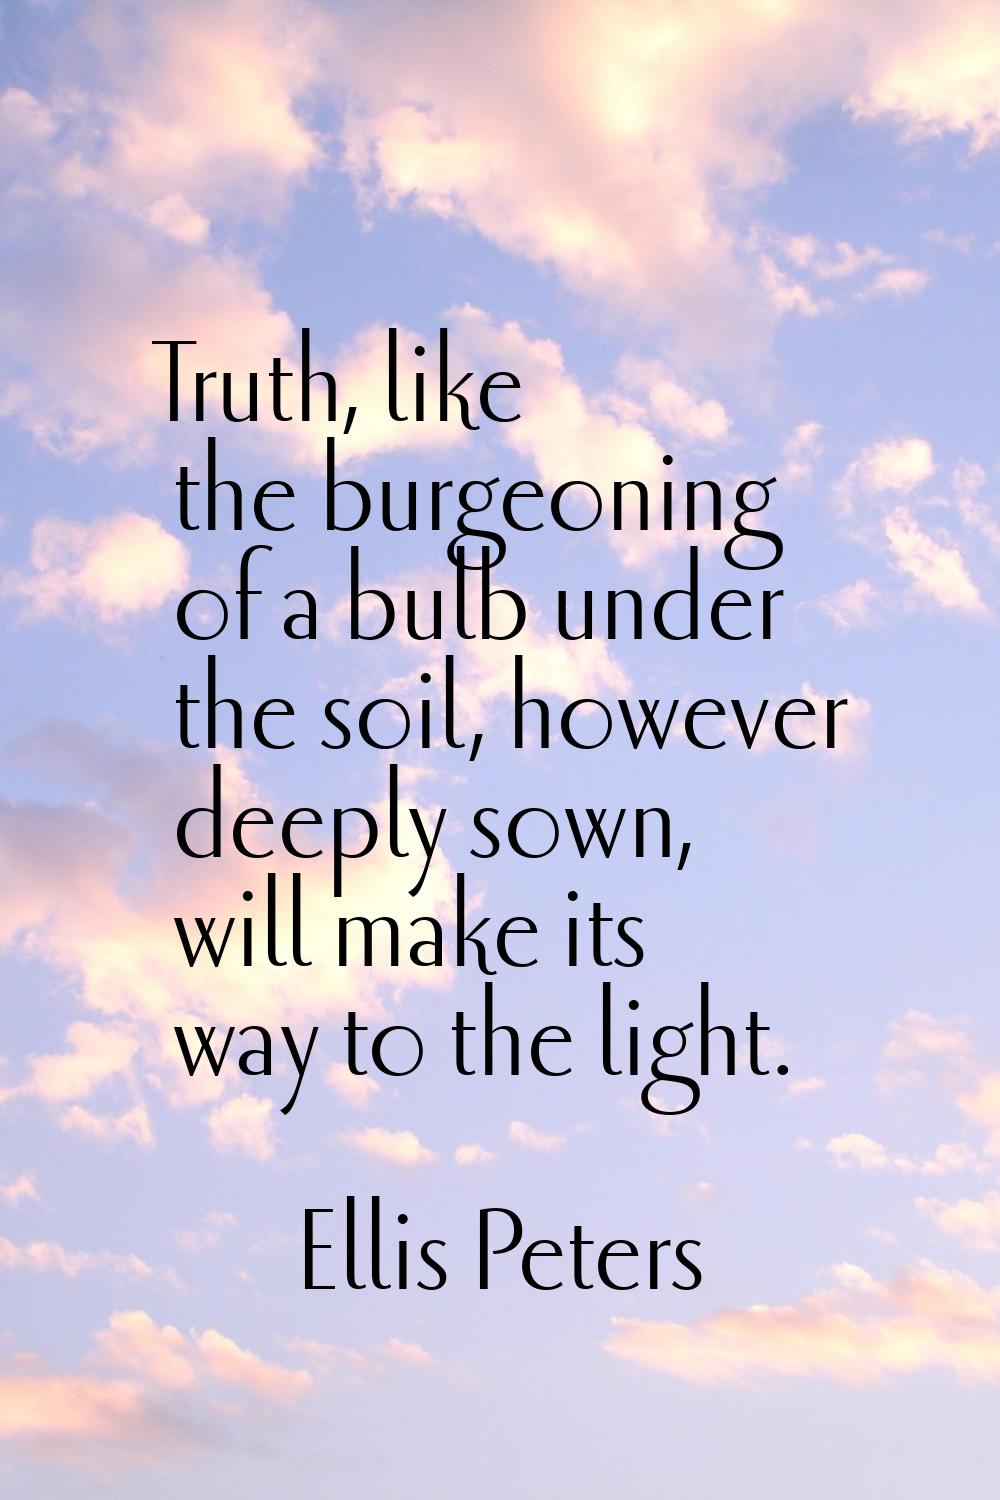 Truth, like the burgeoning of a bulb under the soil, however deeply sown, will make its way to the 